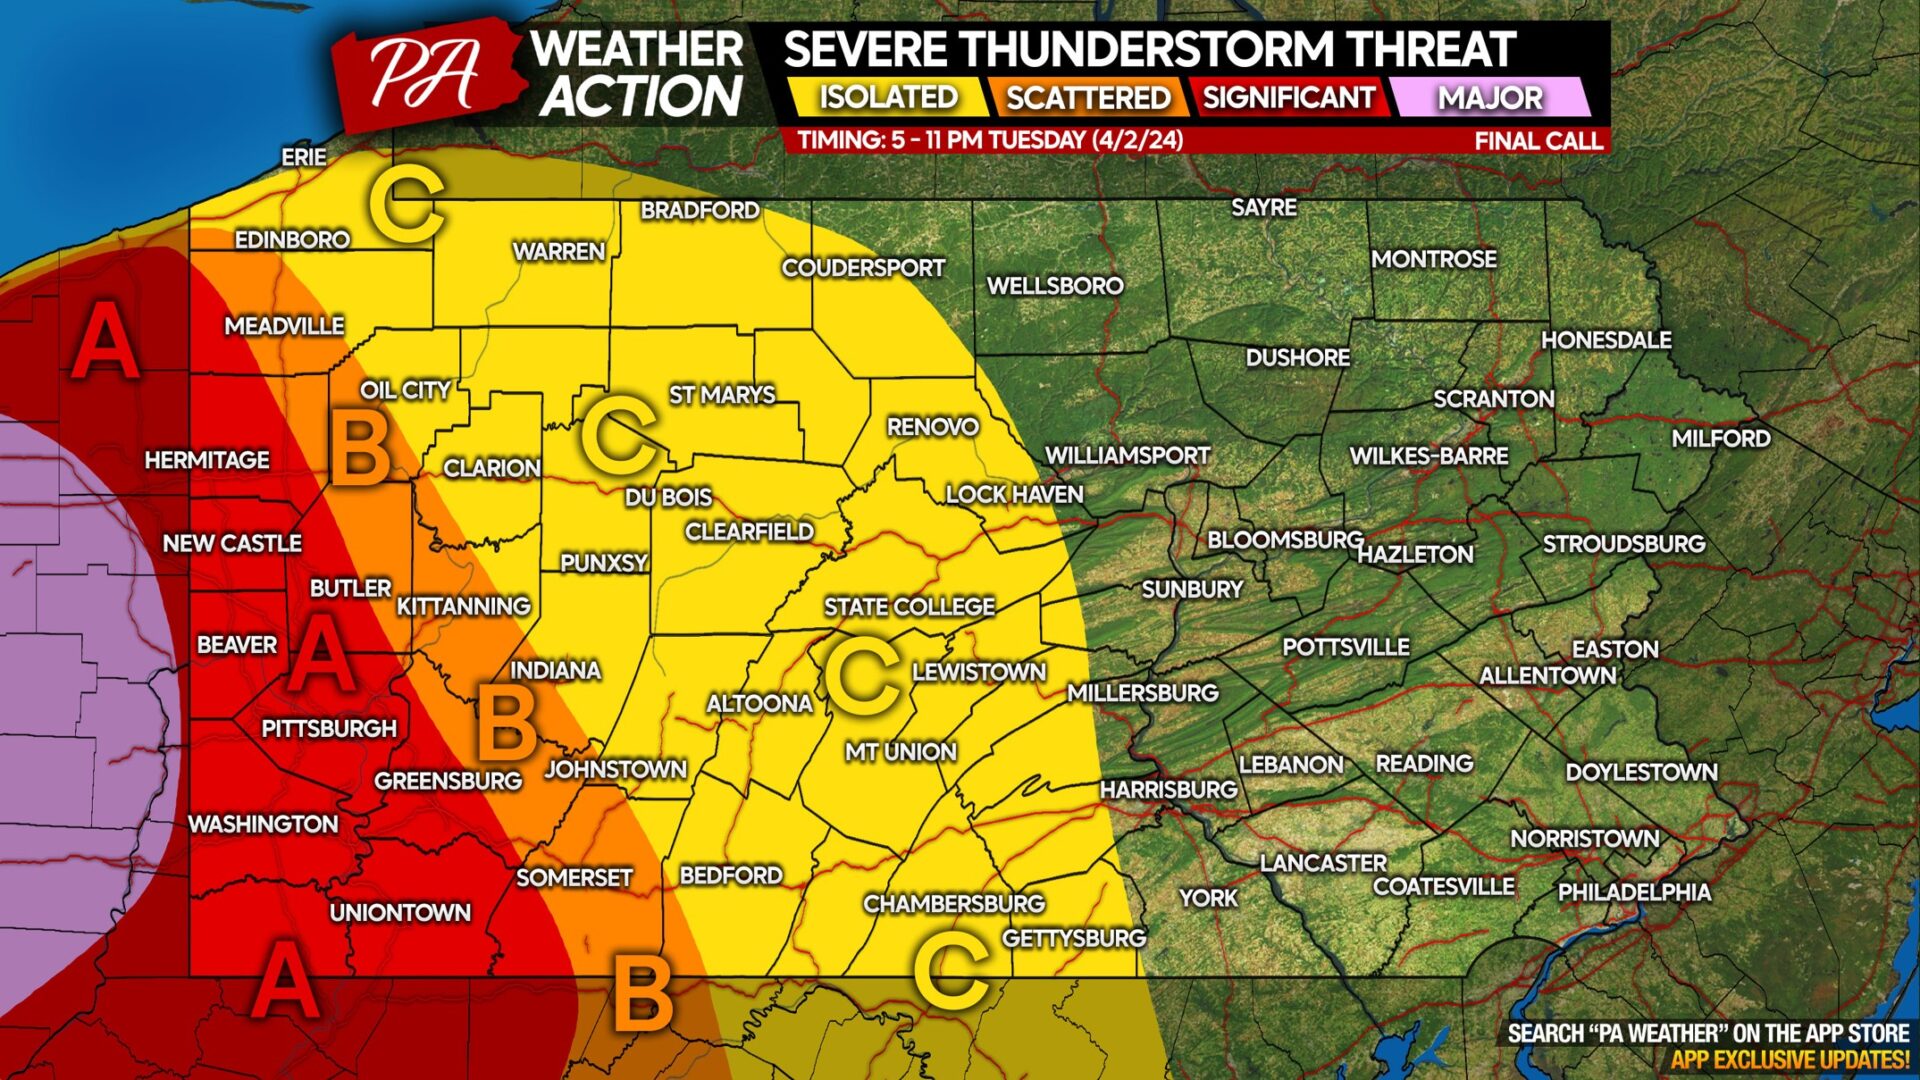 Tornado Outbreak Possible In Parts of Western PA Tuesday; Damaging Winds & Hail Also Possible